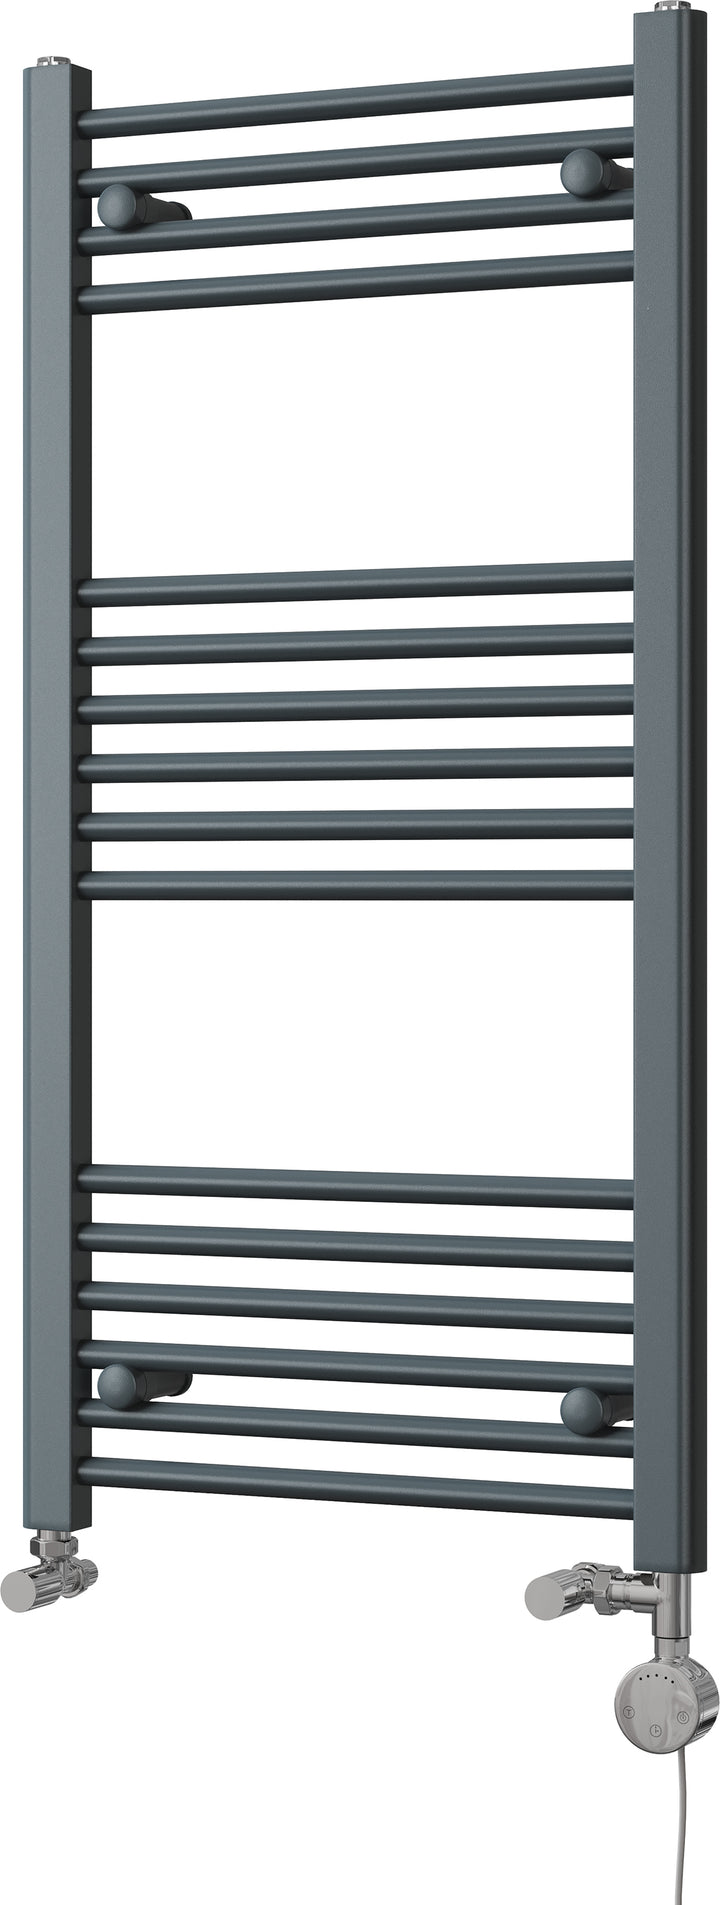 Zennor - Anthracite Dual Fuel Towel Rail  H1000mm x W500mm Thermostatic - Straight